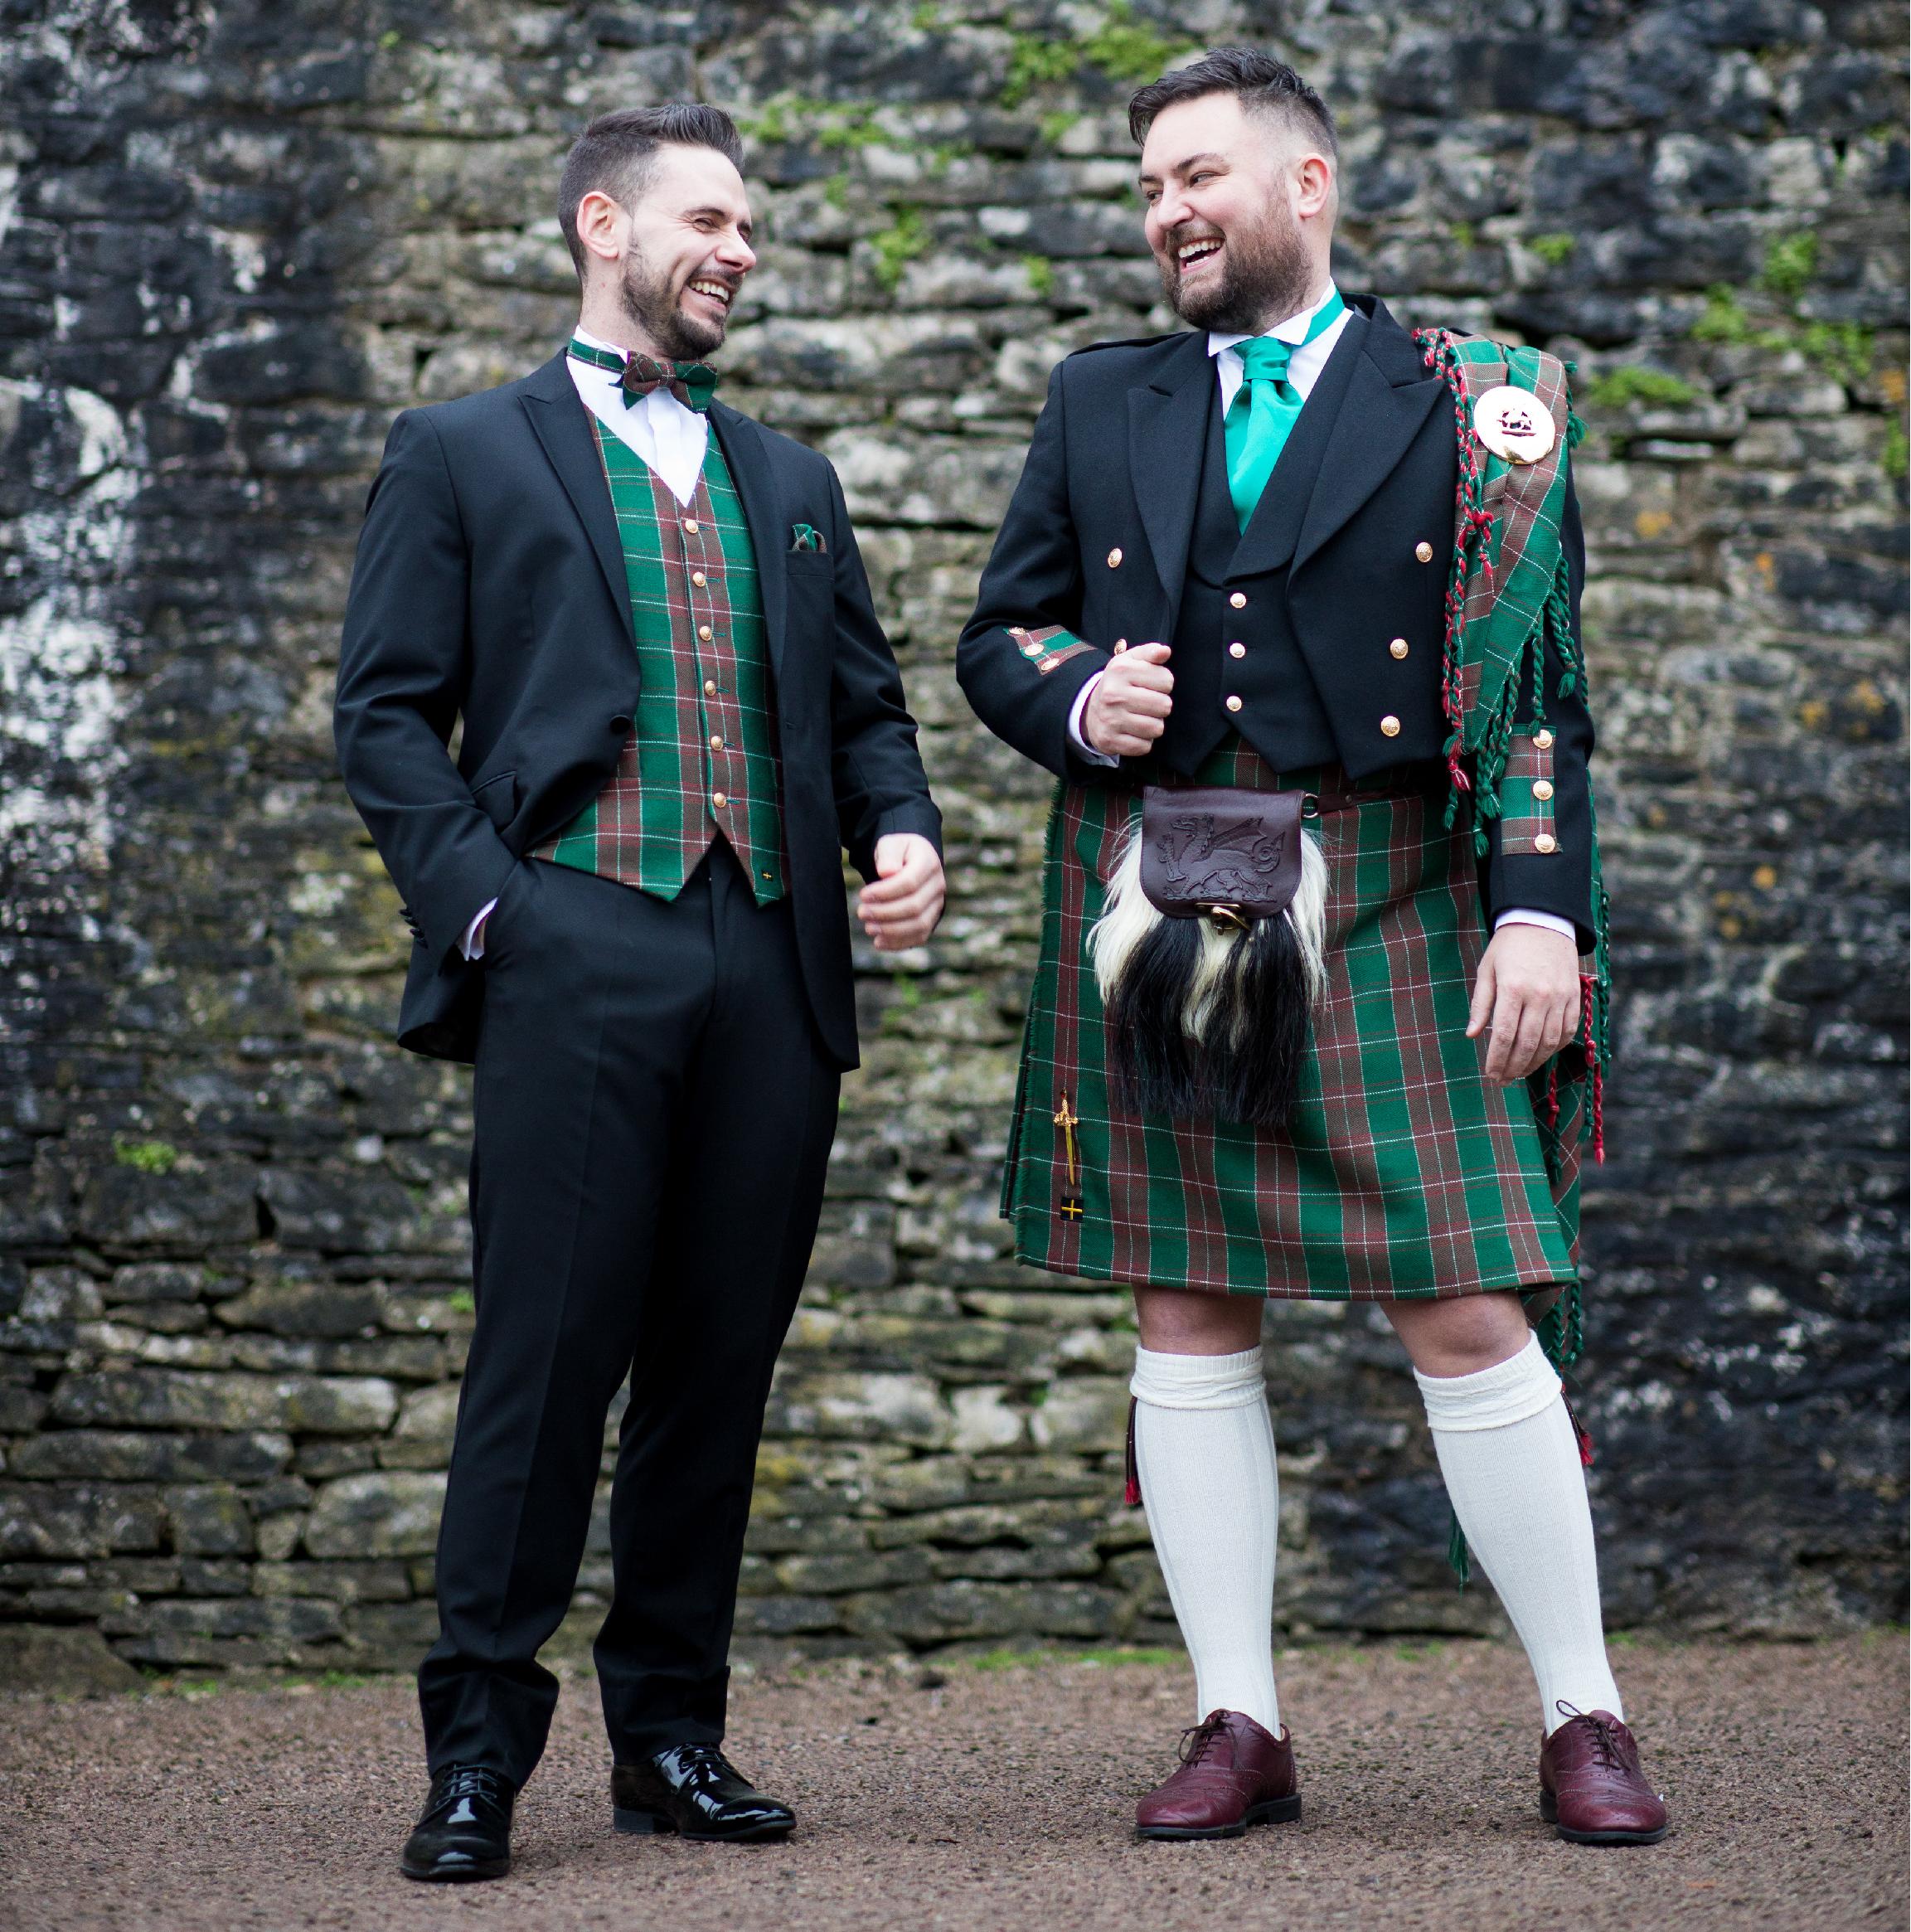 St David's Welsh National Kilt | Available to Hire or Buy | Formal Hire